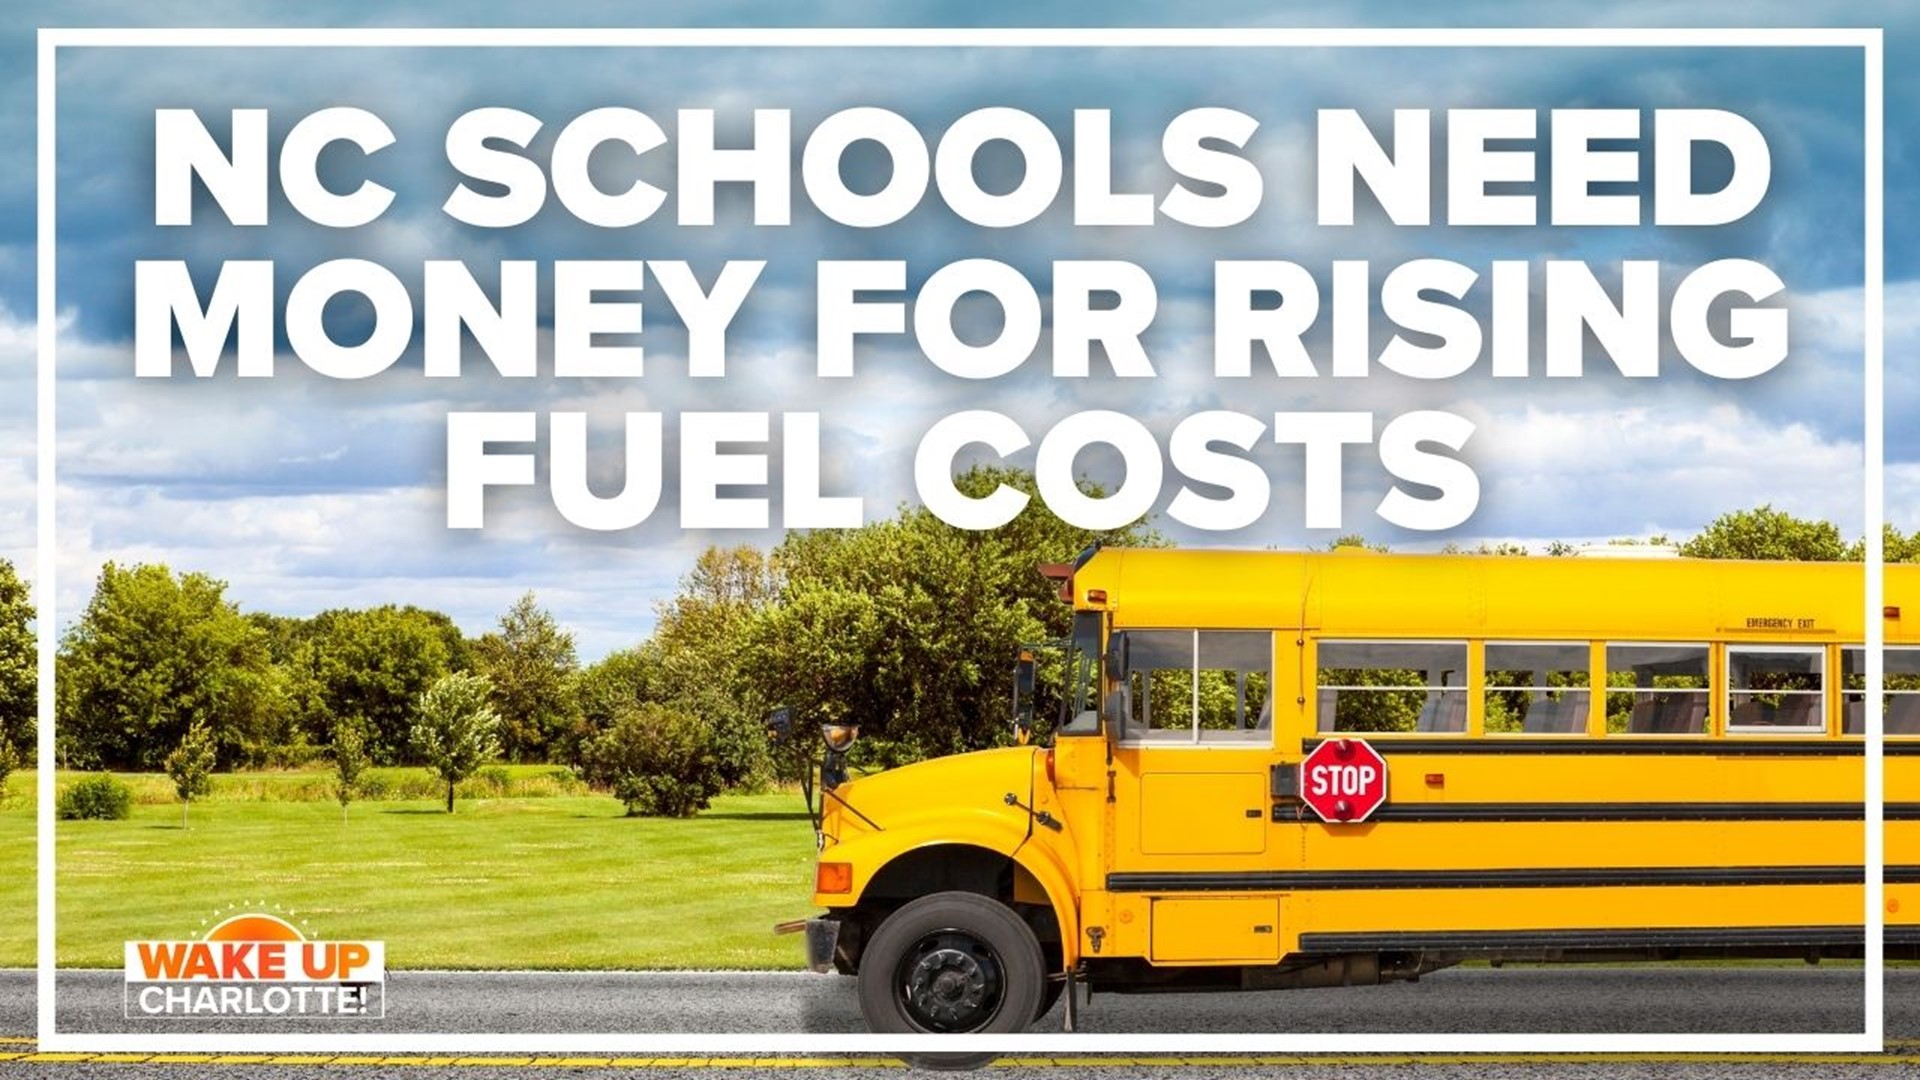 The North Carolina State Board of Education is expected to ask state lawmakers for additional funding to cover high gas prices that have impacted schools.